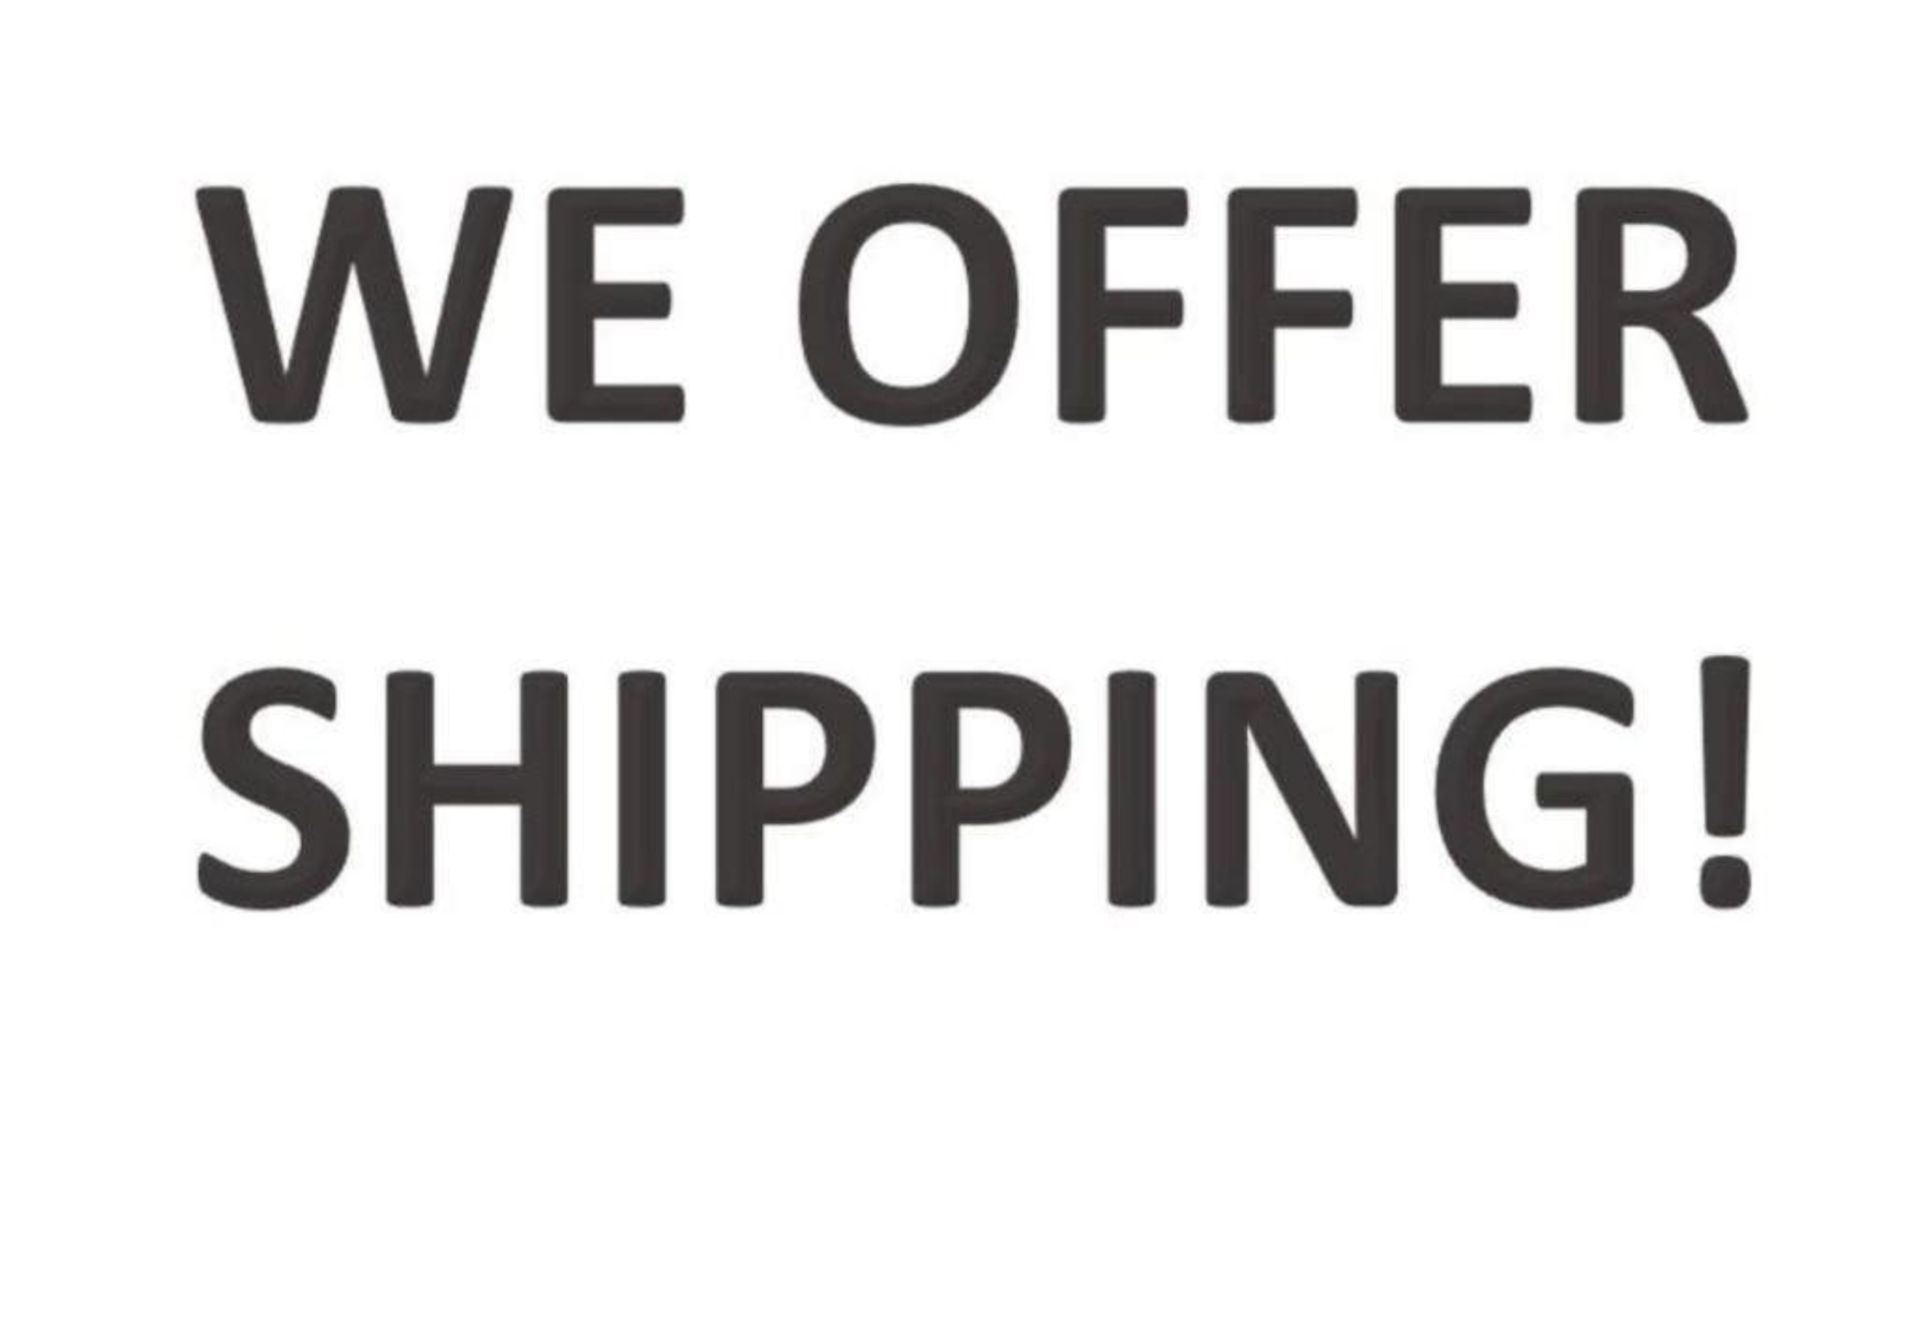 PICKUP OR SHIPPING OPTIONS: